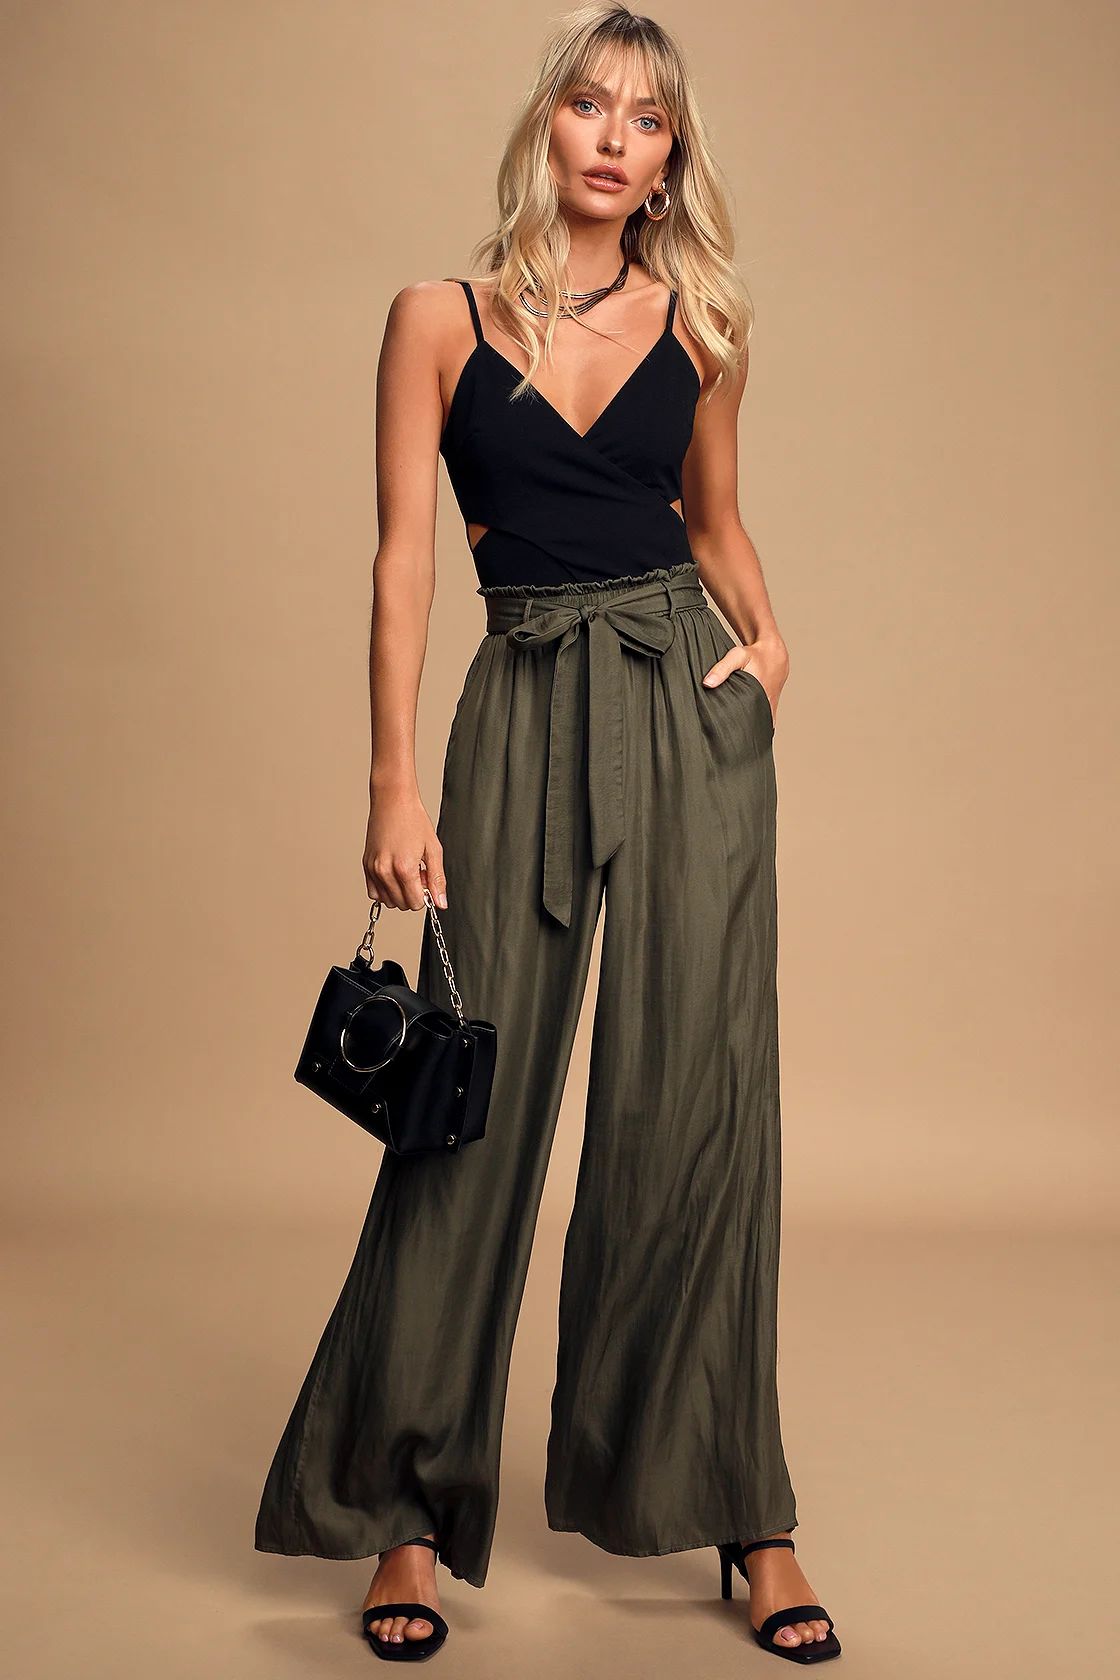 Go With The Flow Olive Green Wide-Leg Pants | Lulus (US)